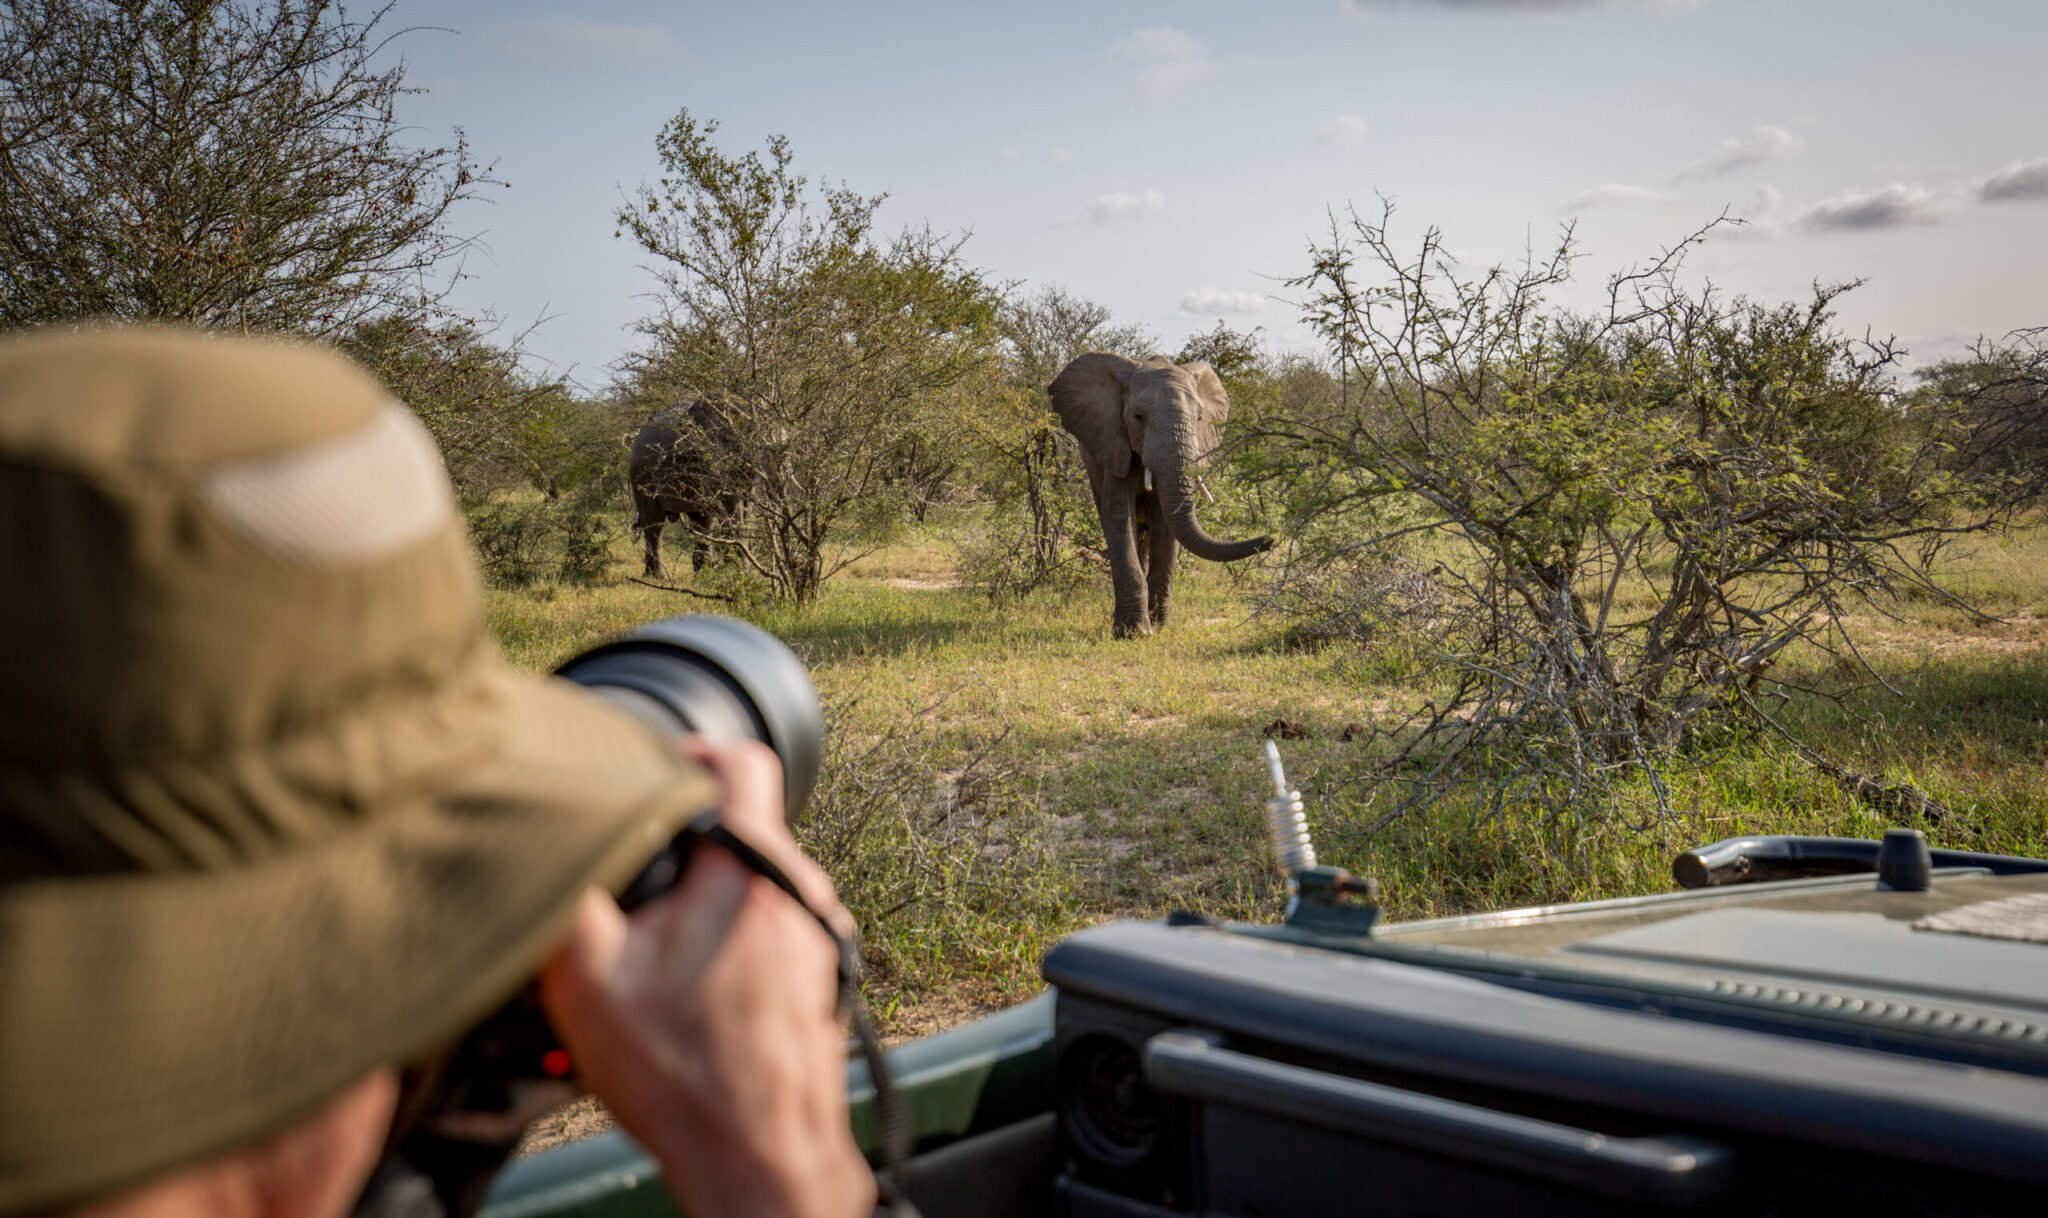 A volunteer photographer captures the moments when elephants gracefully traverse rows of trees.